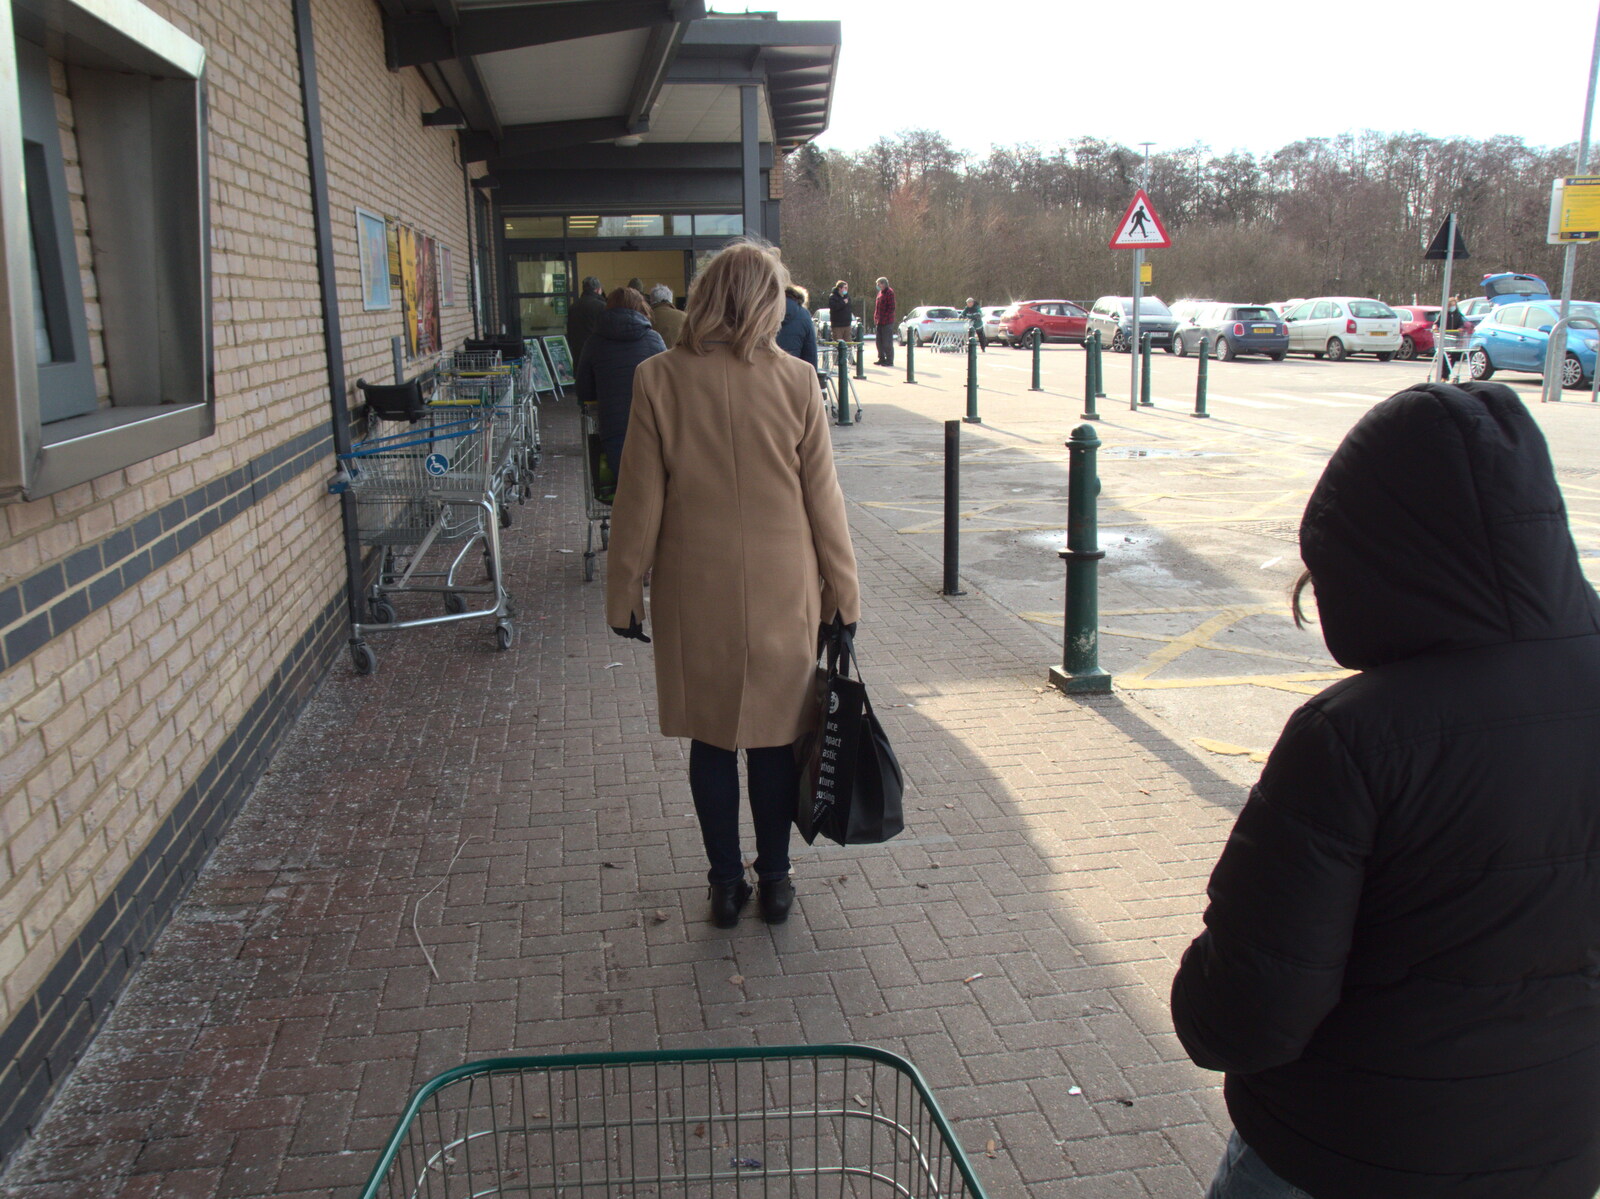 The socially-distant queues are back at Morrisons from Derelict Infants School and Ice Sculptures, Diss and Palgrave, Norfolk and Suffolk - 13th February 2021